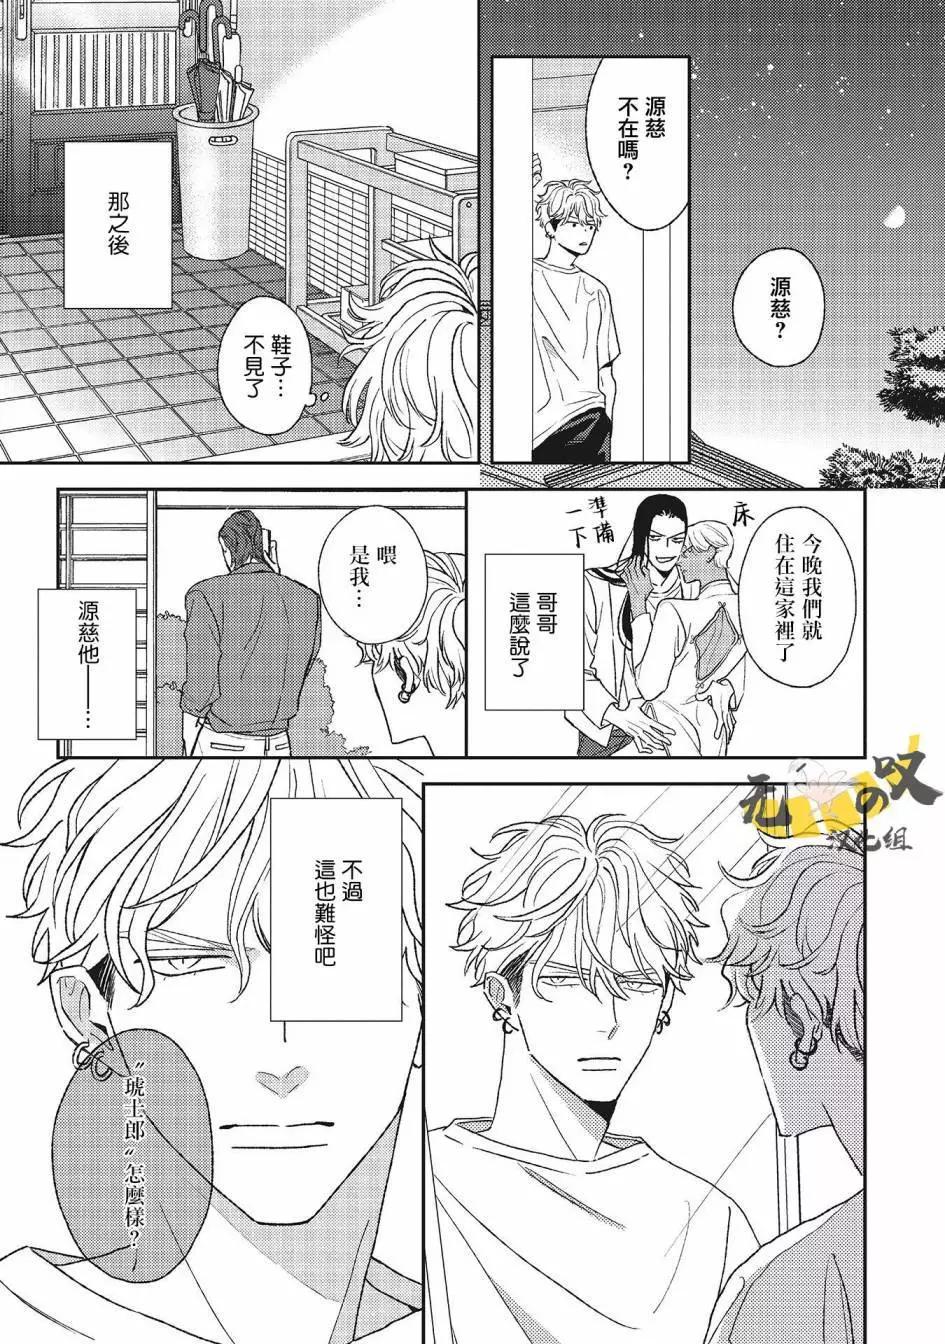 His Little Amber - 第03話 - 2